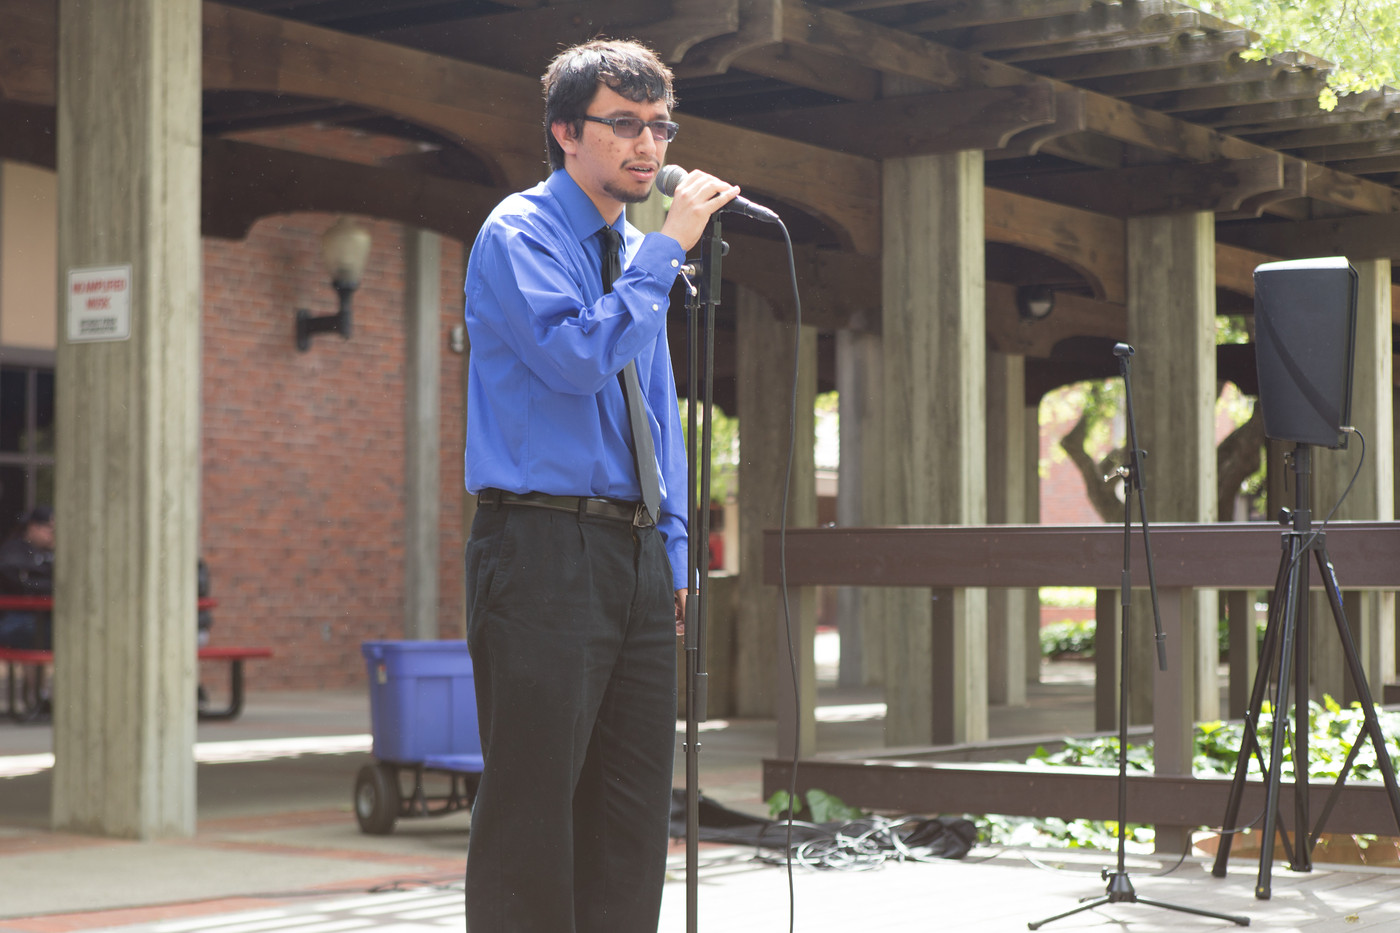 City College student Raymond Concha, international studies major, speaks to students in the Quad during candidate forums April 7, 2016. Concha is running for the position of Student Senate Vice President uncontested. Hector Flores, Staff Photographer. | hectorfloresexpress@gmail.com